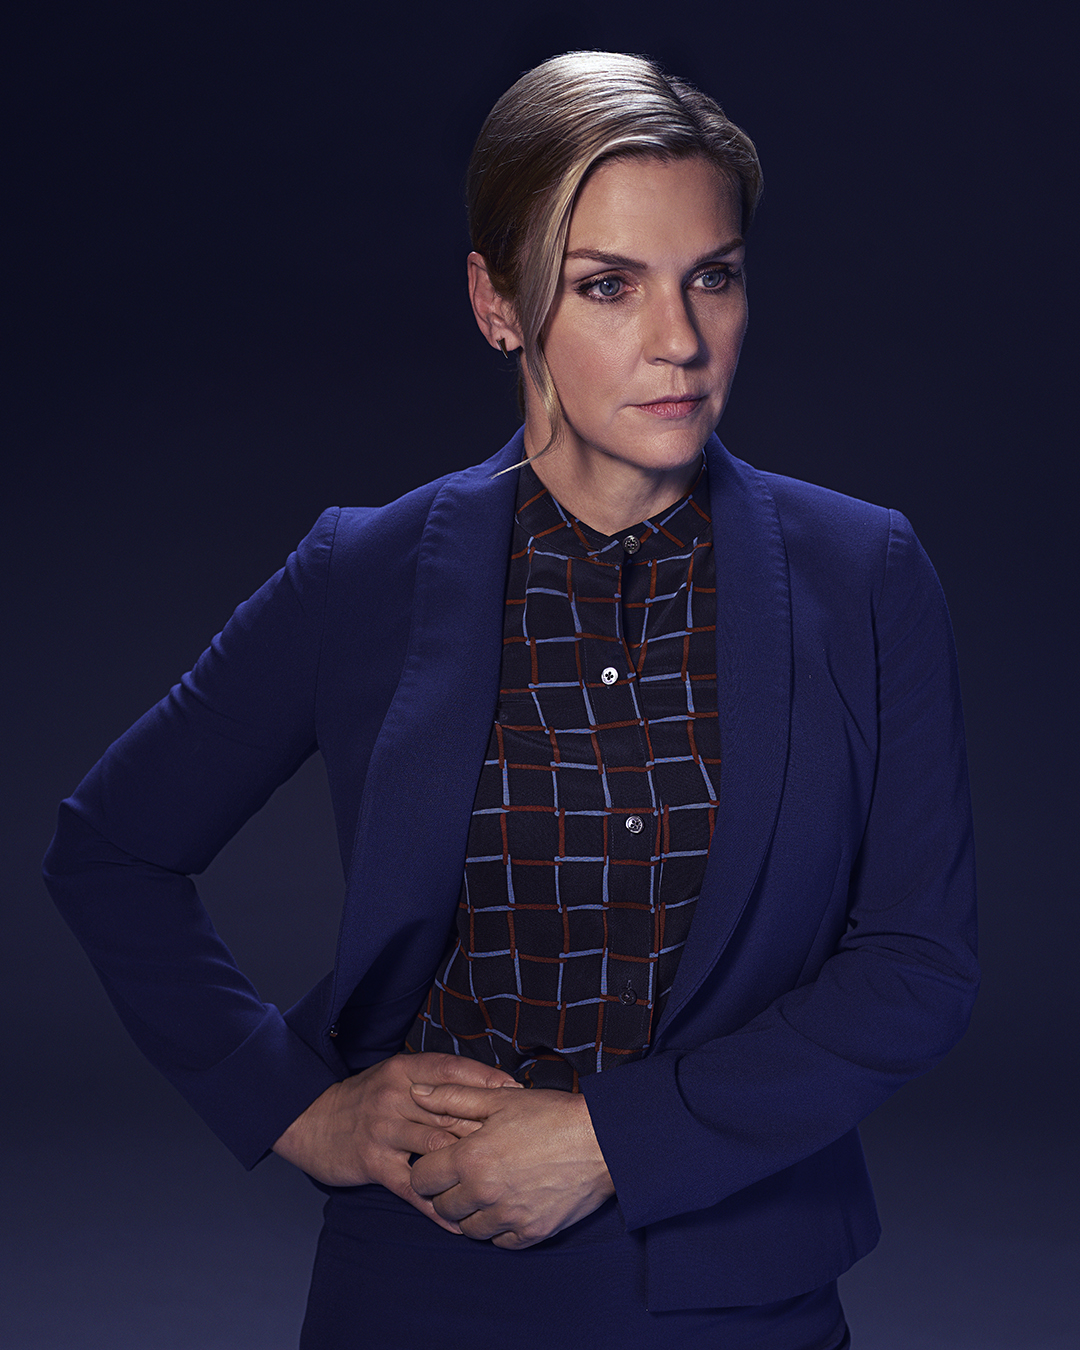 What's going to happen to Kim Wexler in Better Call Saul?